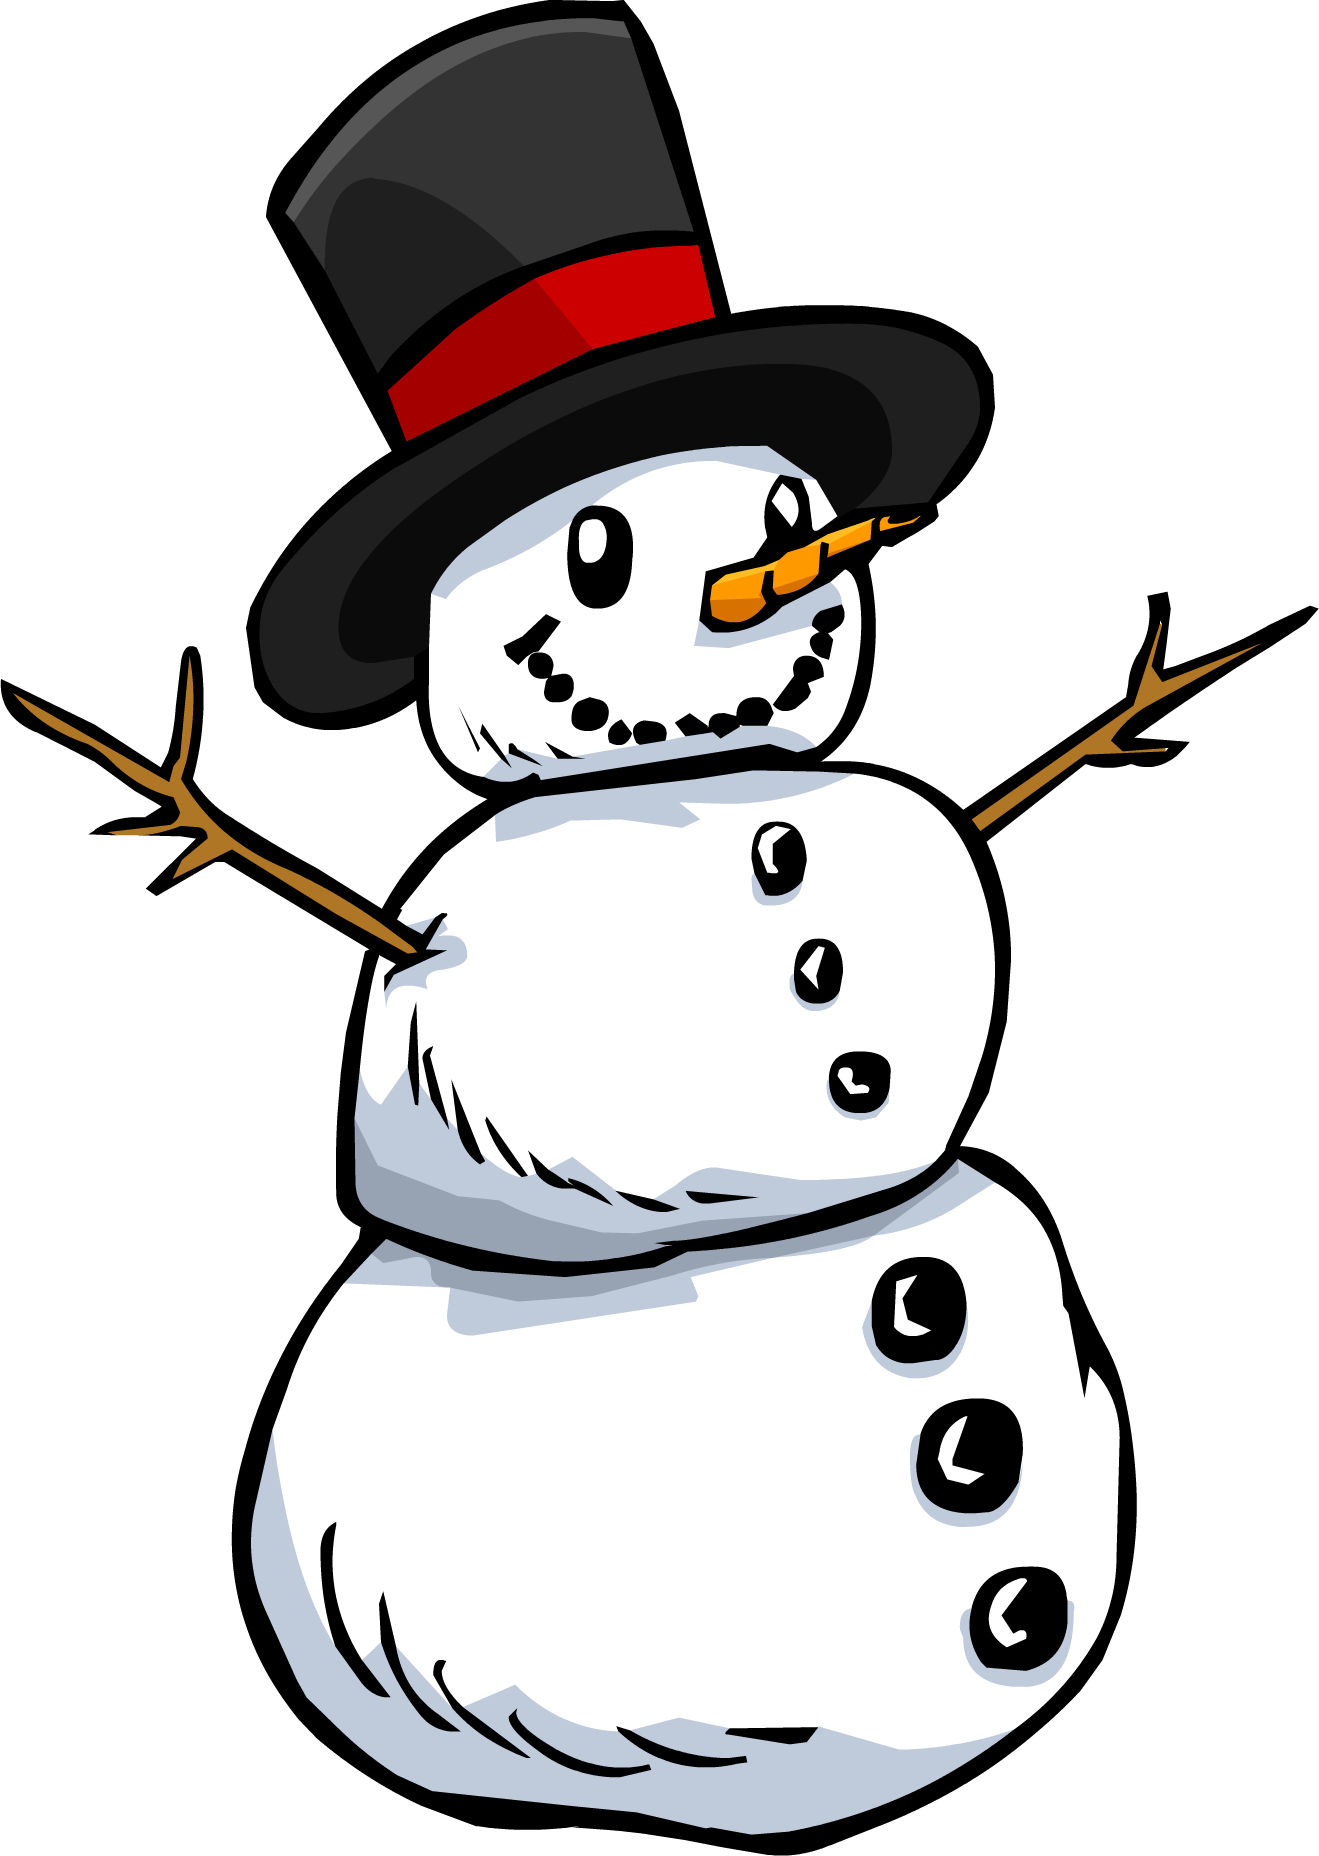 Cute Snowman PNG Image Background